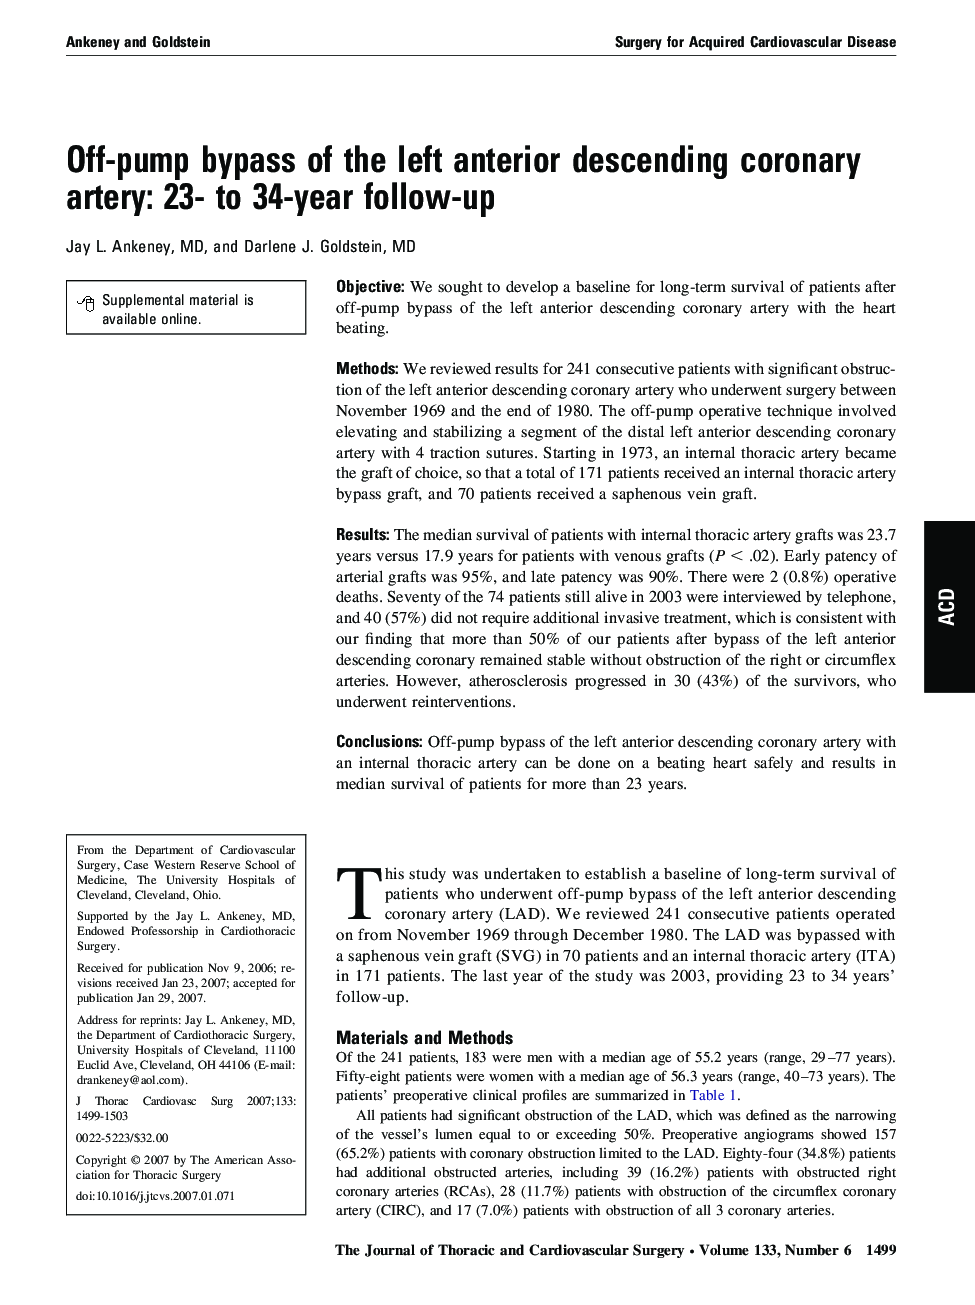 Off-pump bypass of the left anterior descending coronary artery: 23- to 34-year follow-up